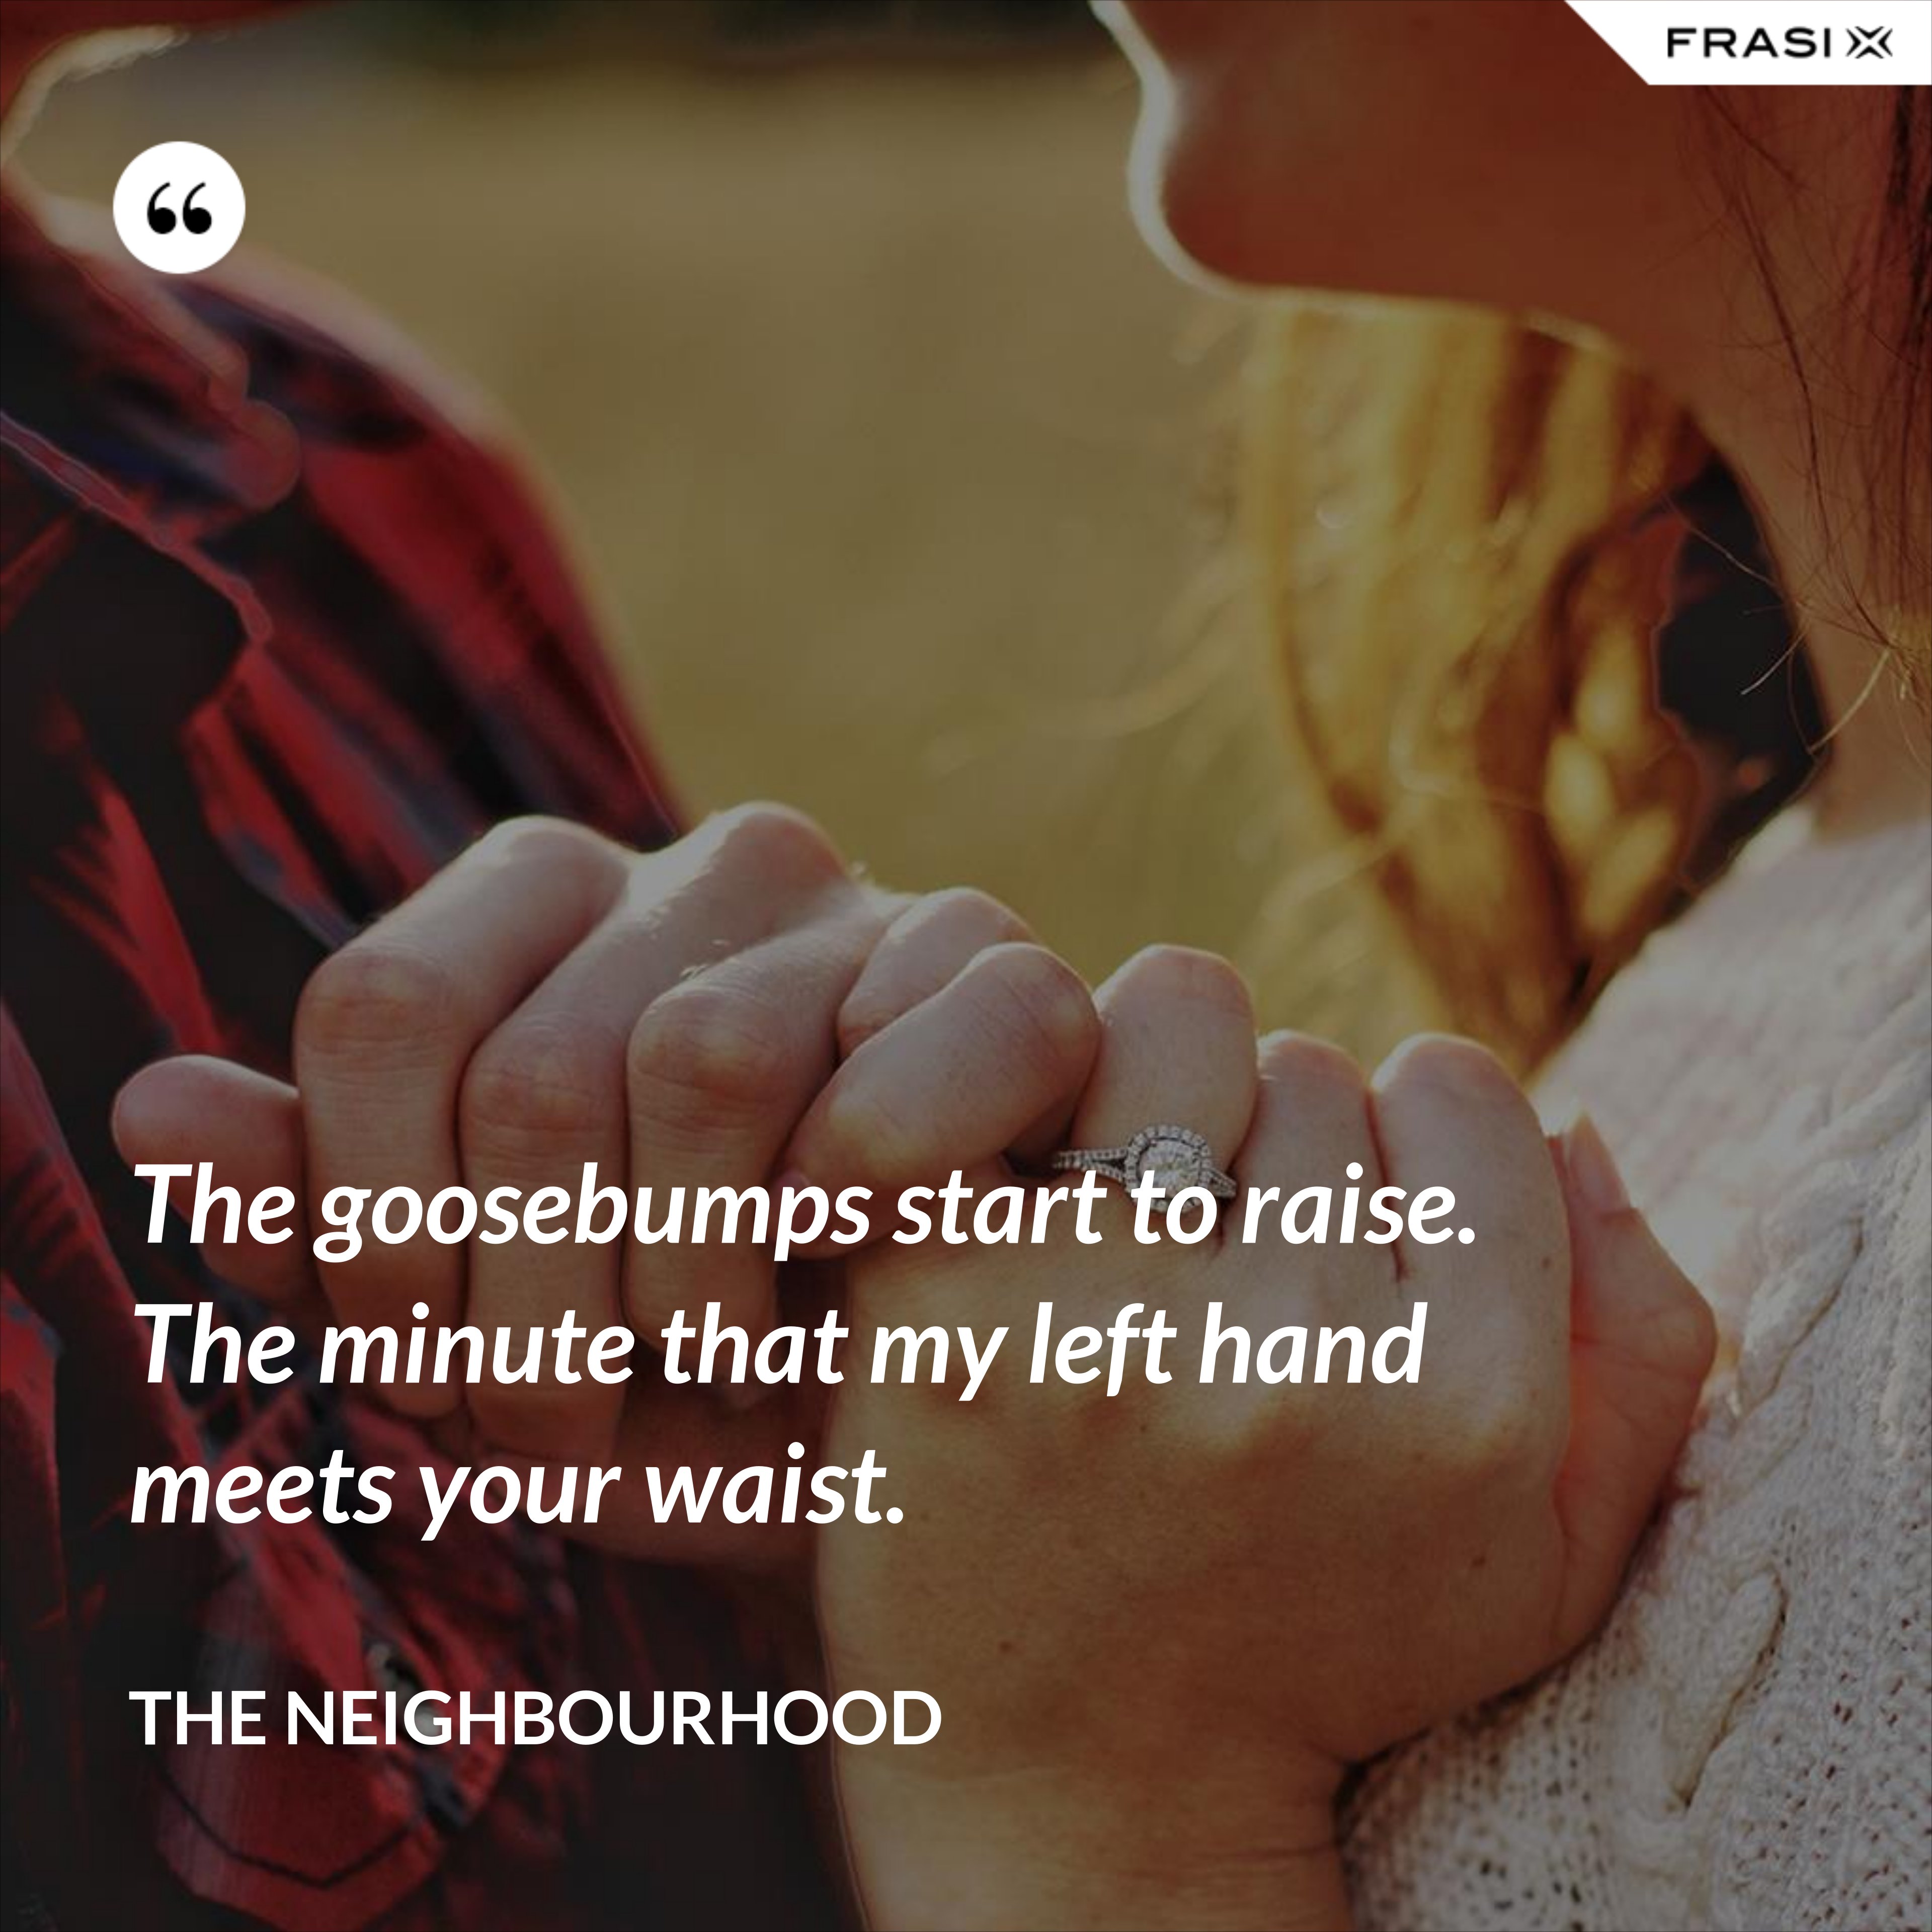 The goosebumps start to raise. The minute that my left hand meets your waist. - The Neighbourhood